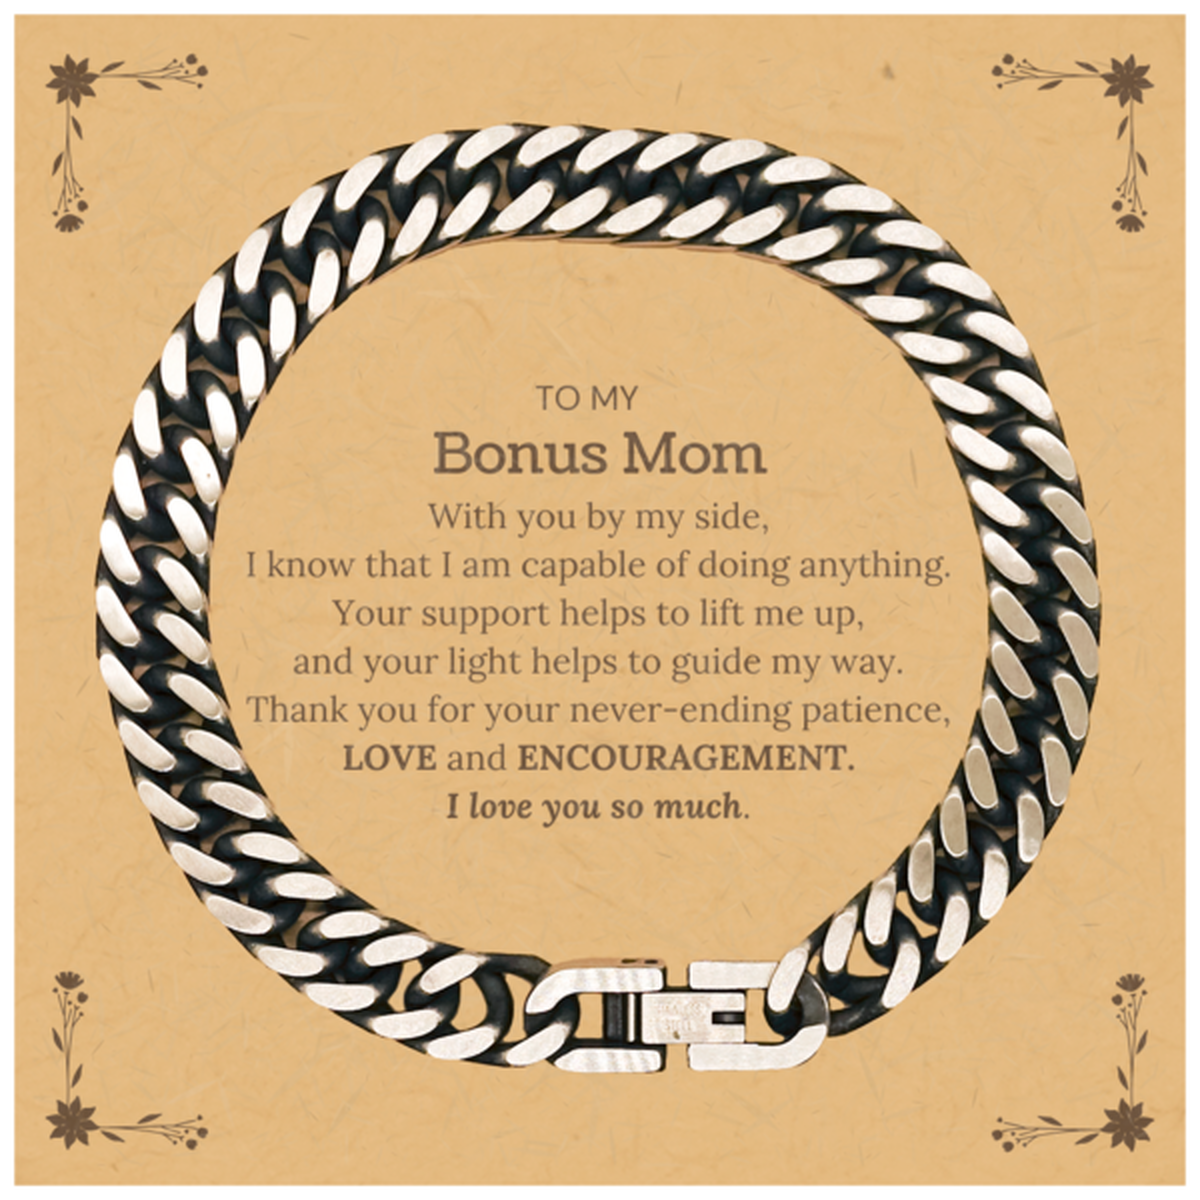 Appreciation Bonus Mom Cuban Link Chain Bracelet Gifts, To My Bonus Mom Birthday Christmas Wedding Keepsake Gifts for Bonus Mom With you by my side, I know that I am capable of doing anything. I love you so much